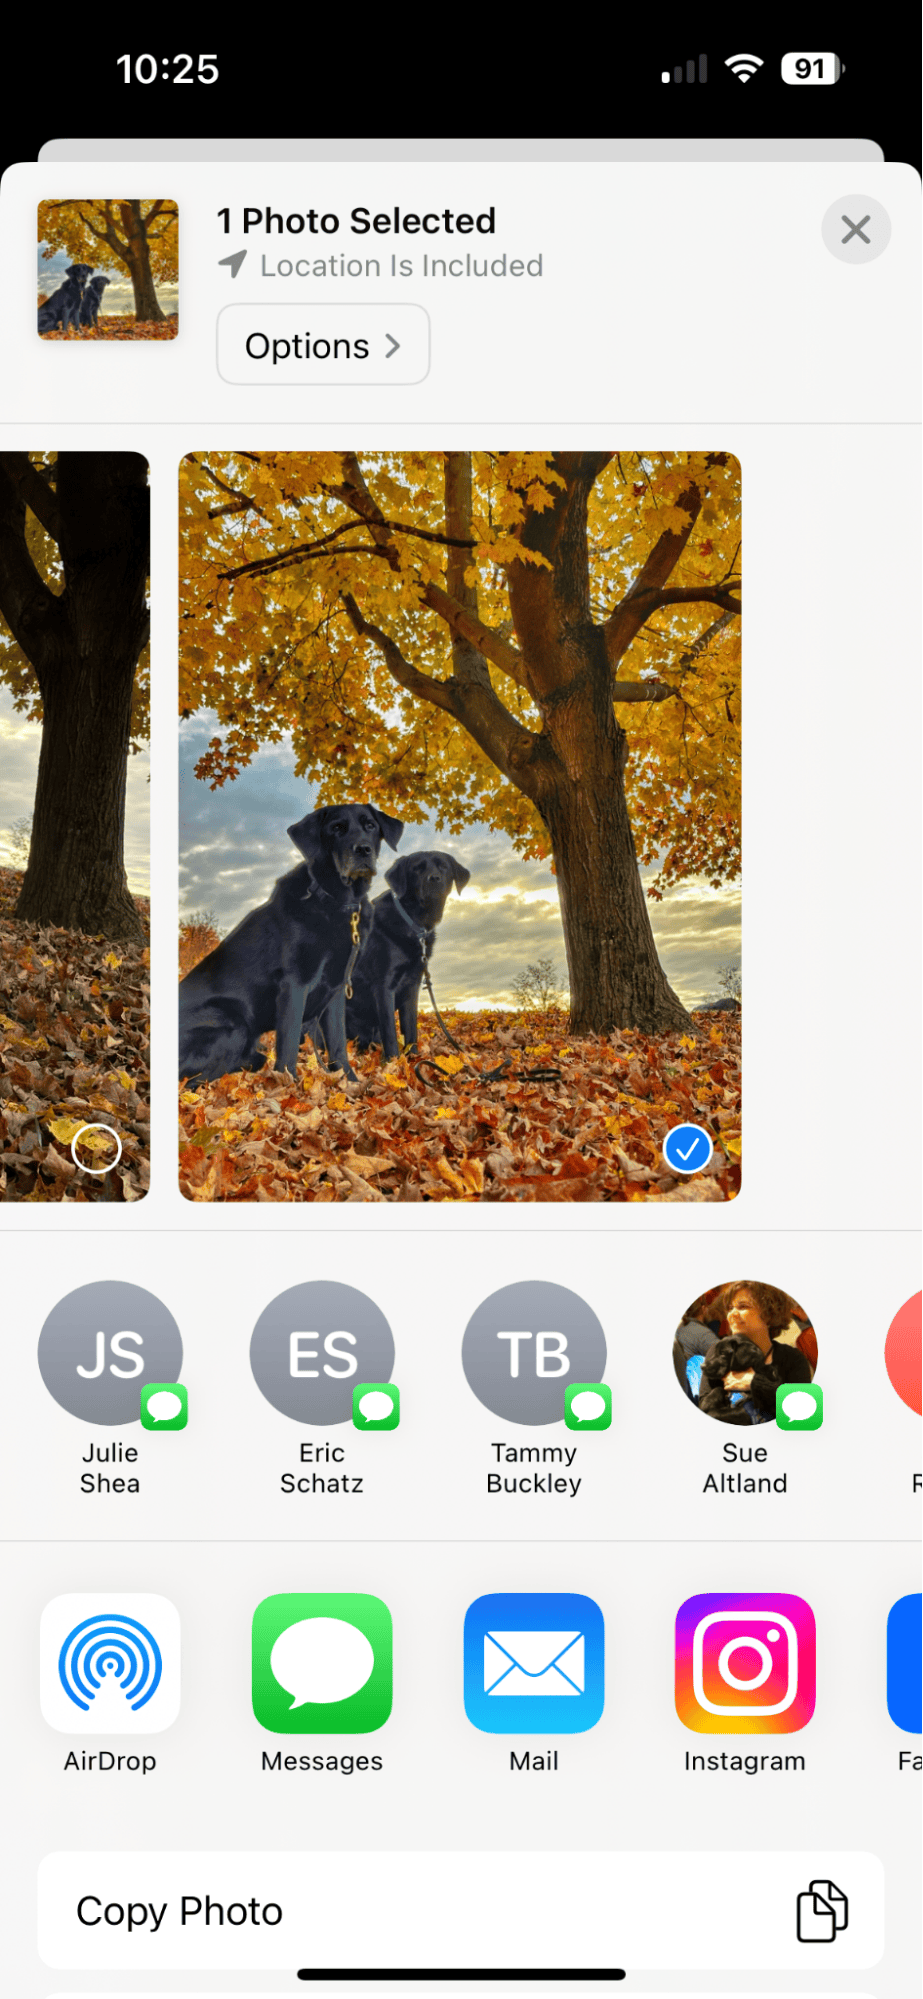 How to email a photo from iPhone: the Photos app